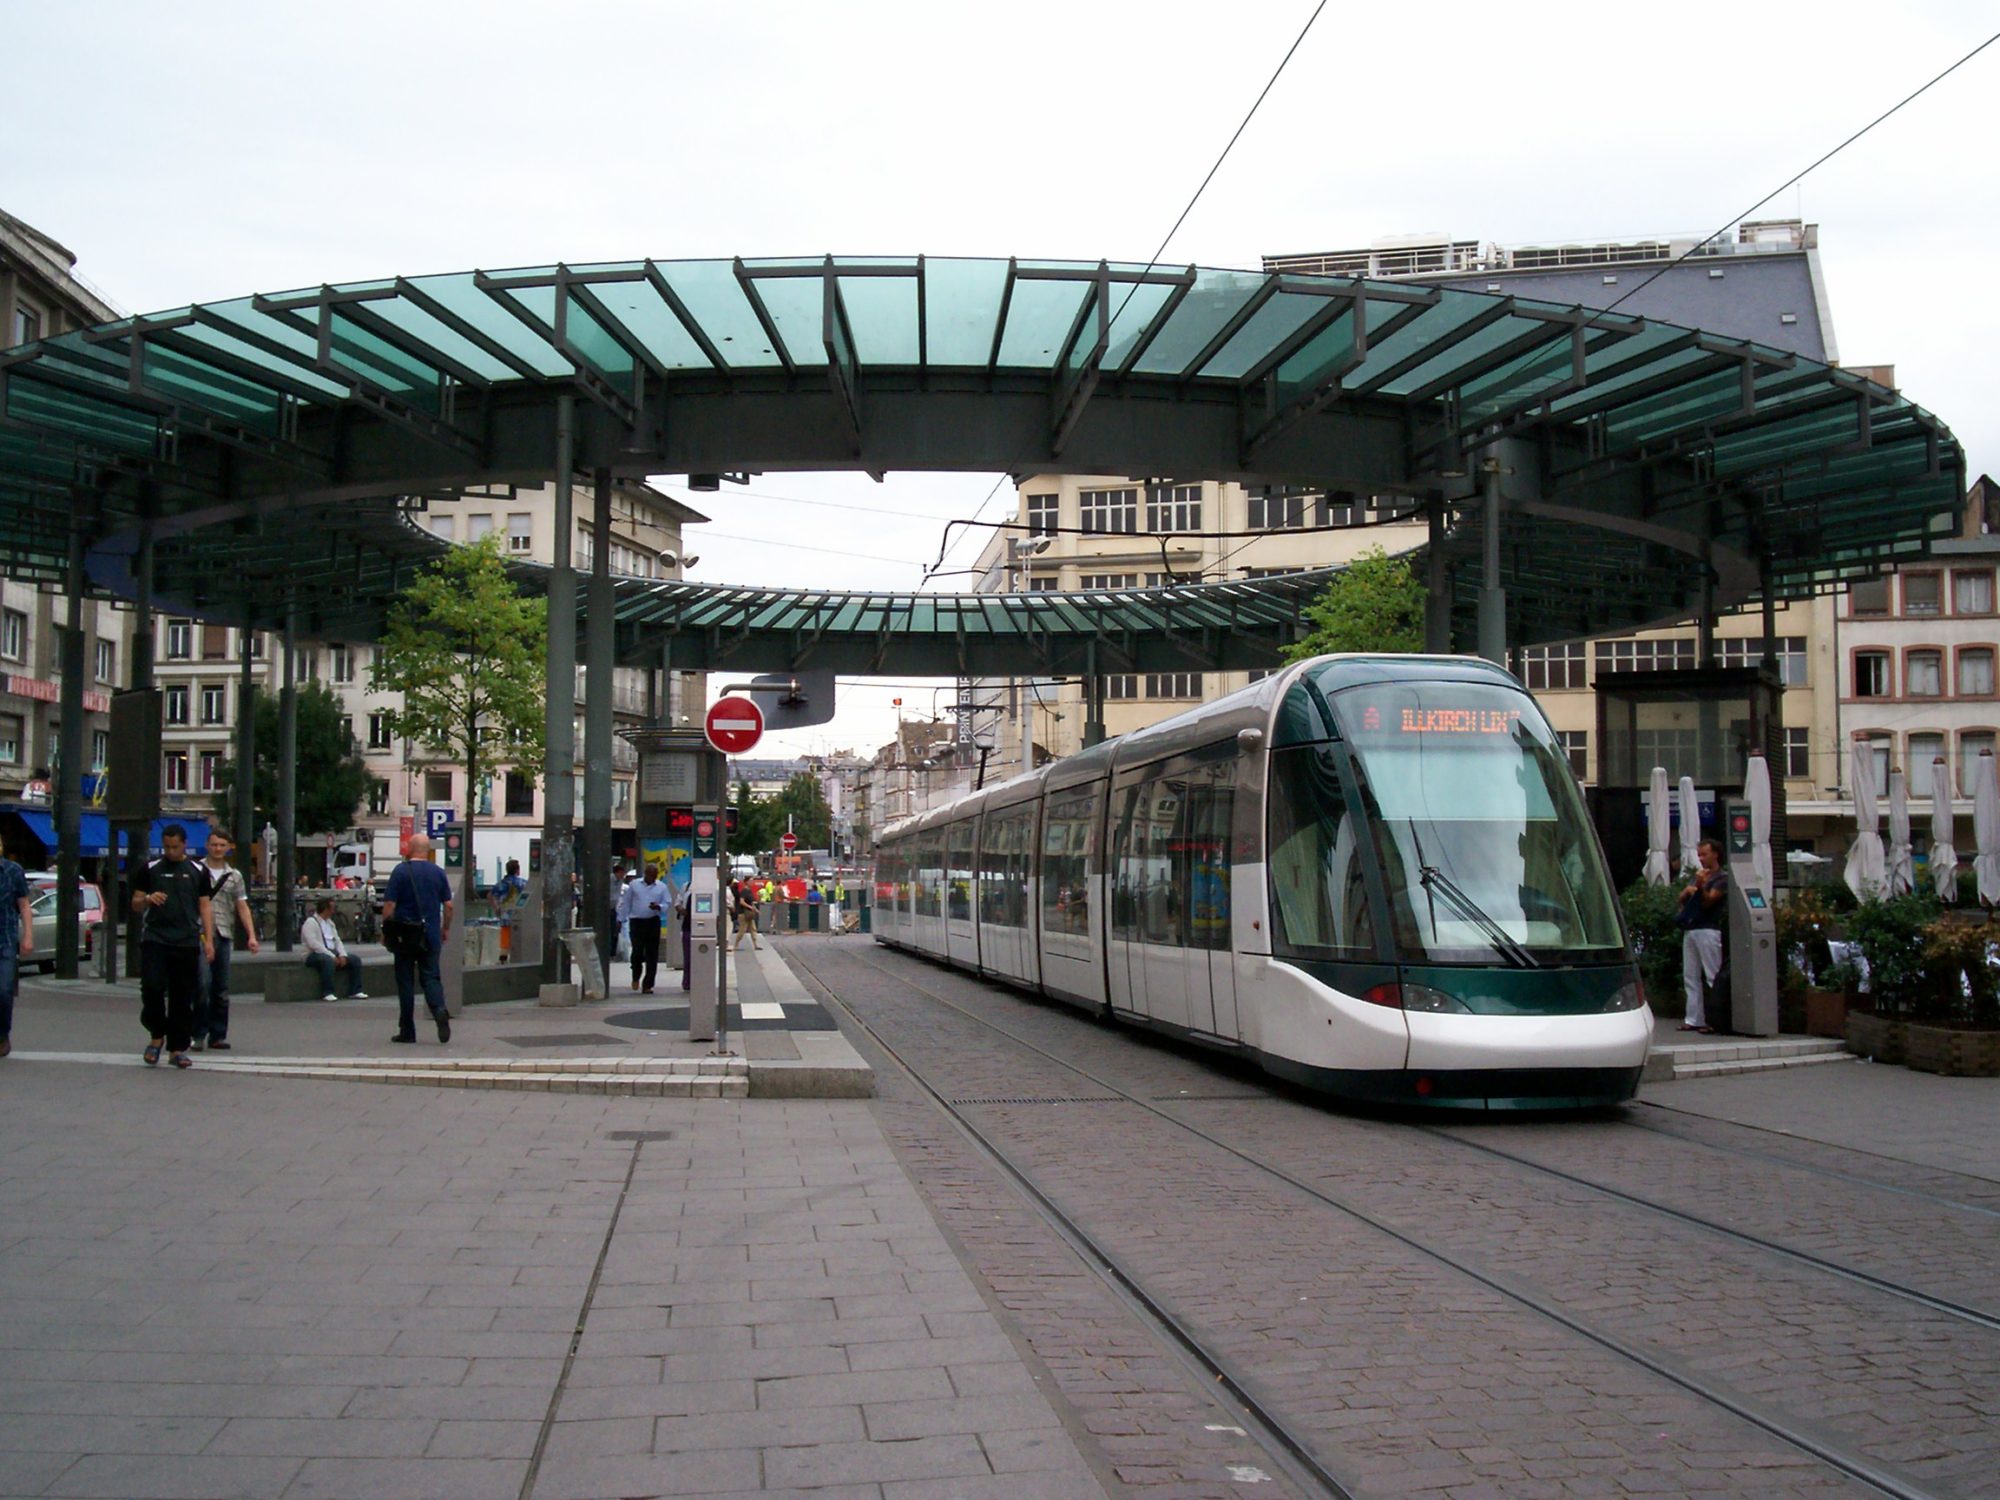 Constructing a World-Class Tramway System: Building Identity through Innovative Urbanism in the “Glocal” City of Strasbourg, France